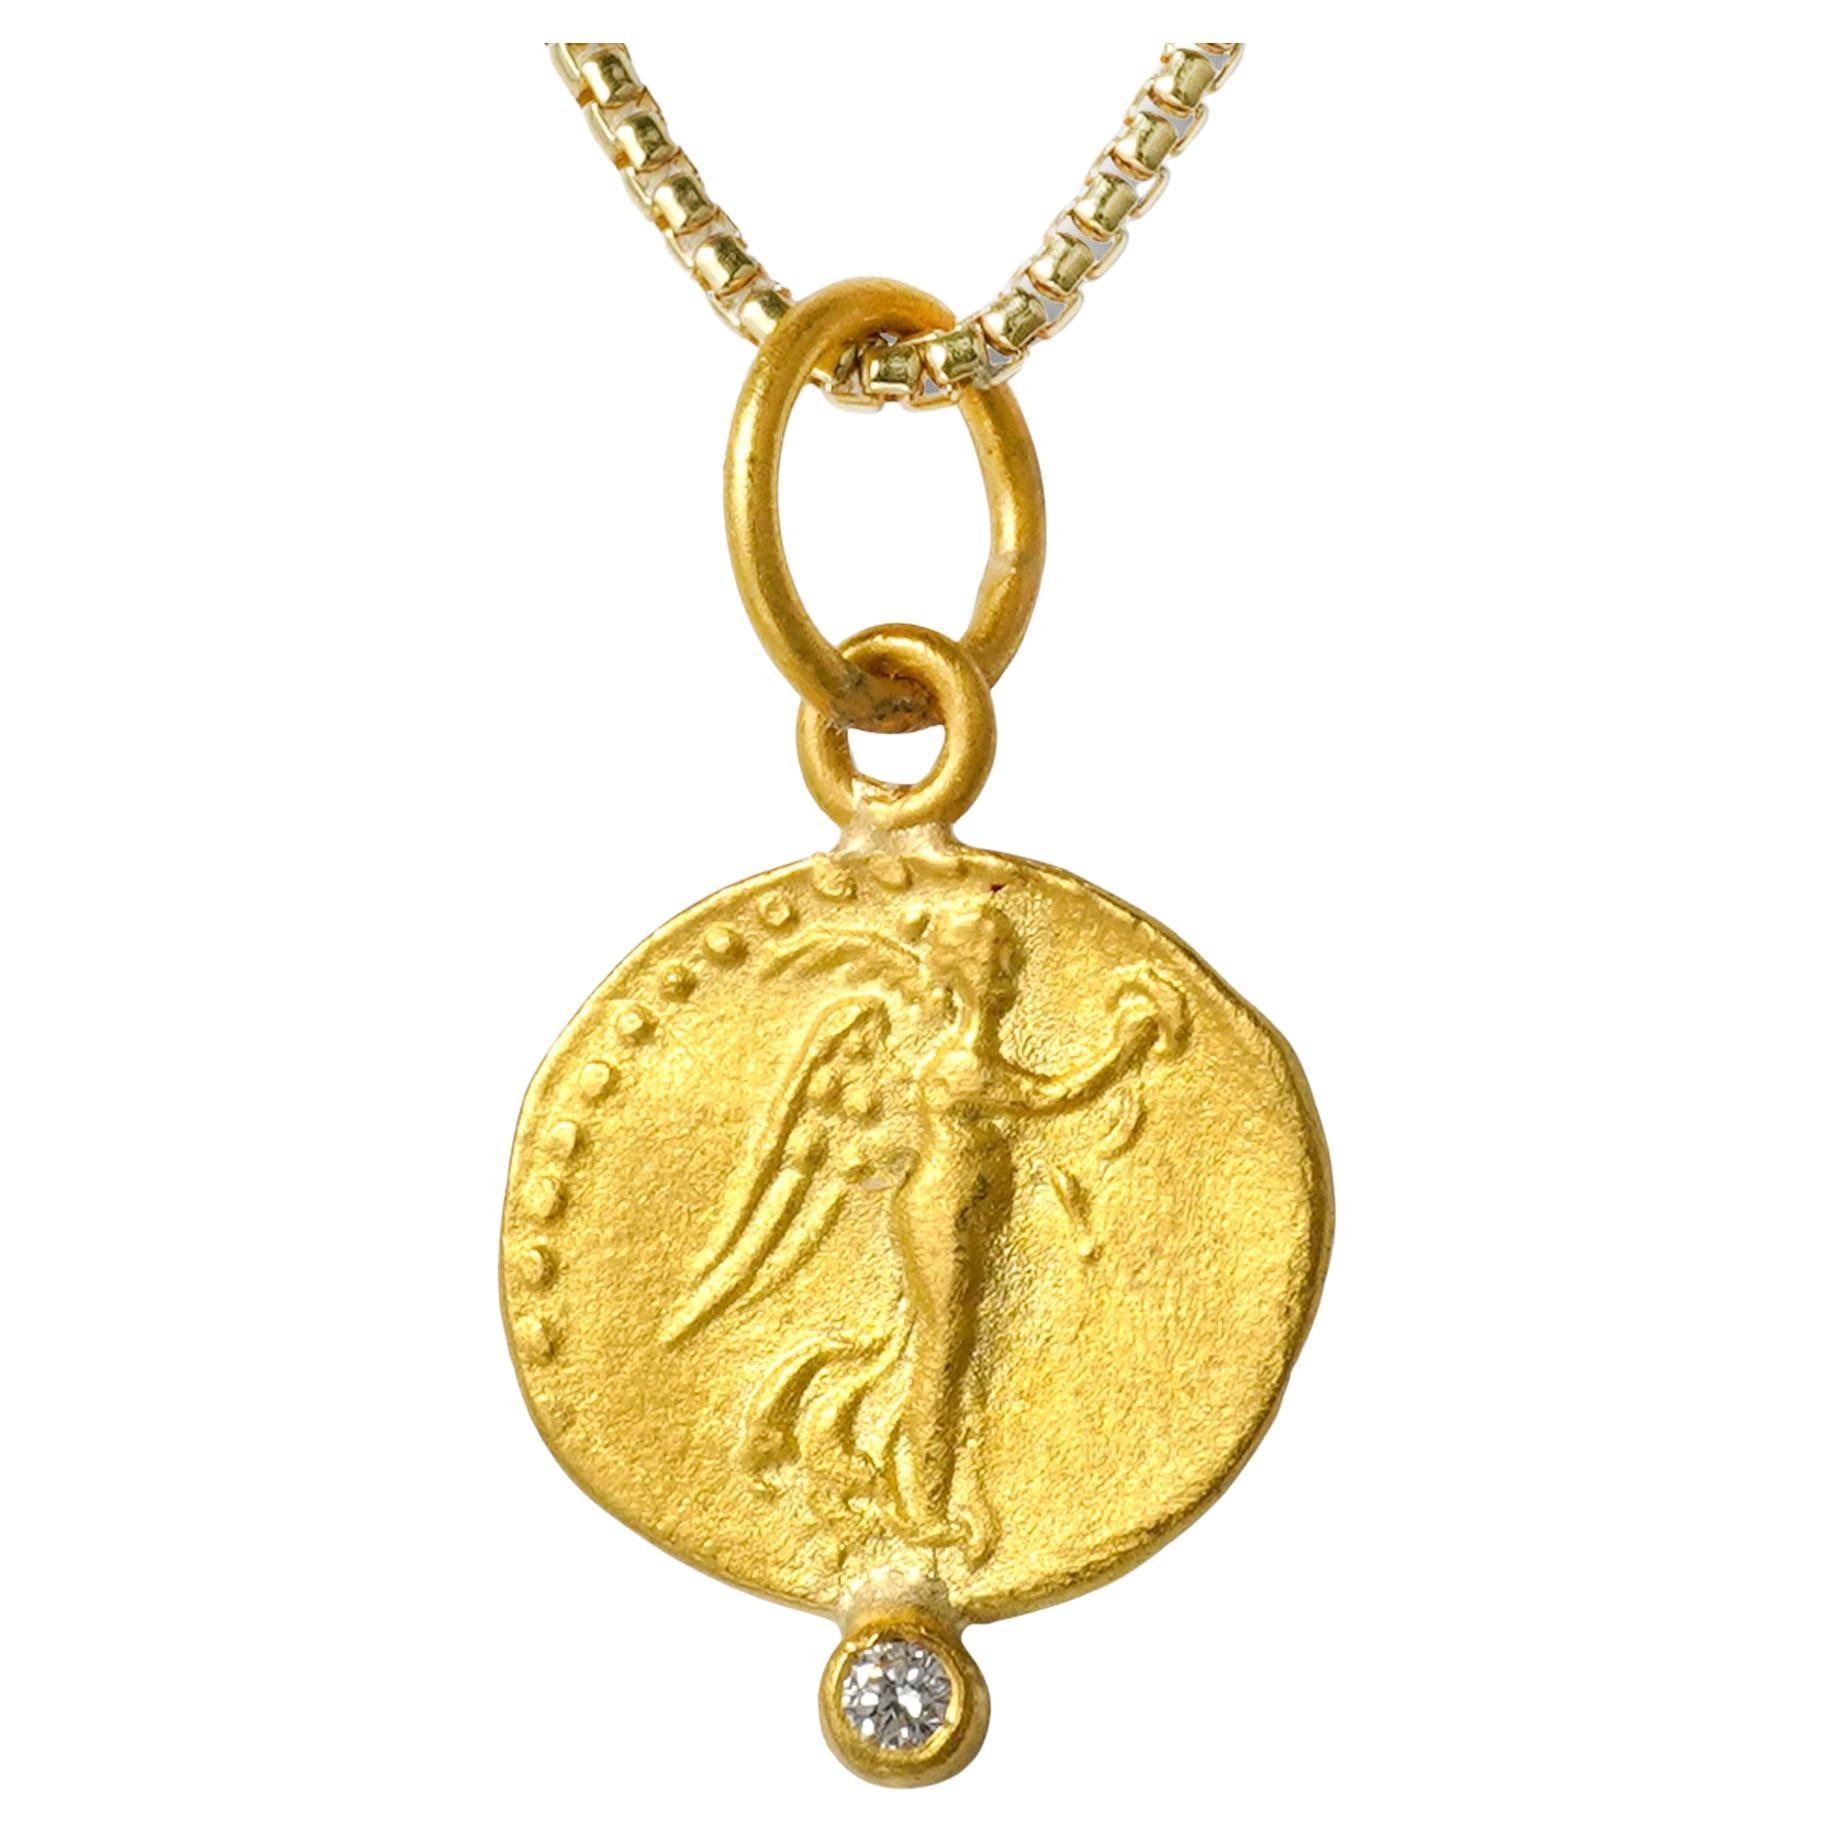 Ancient, Nike Charm Coin (Replica) Pendant with 0.02ct Diamond, 24kt Solid Gold For Sale